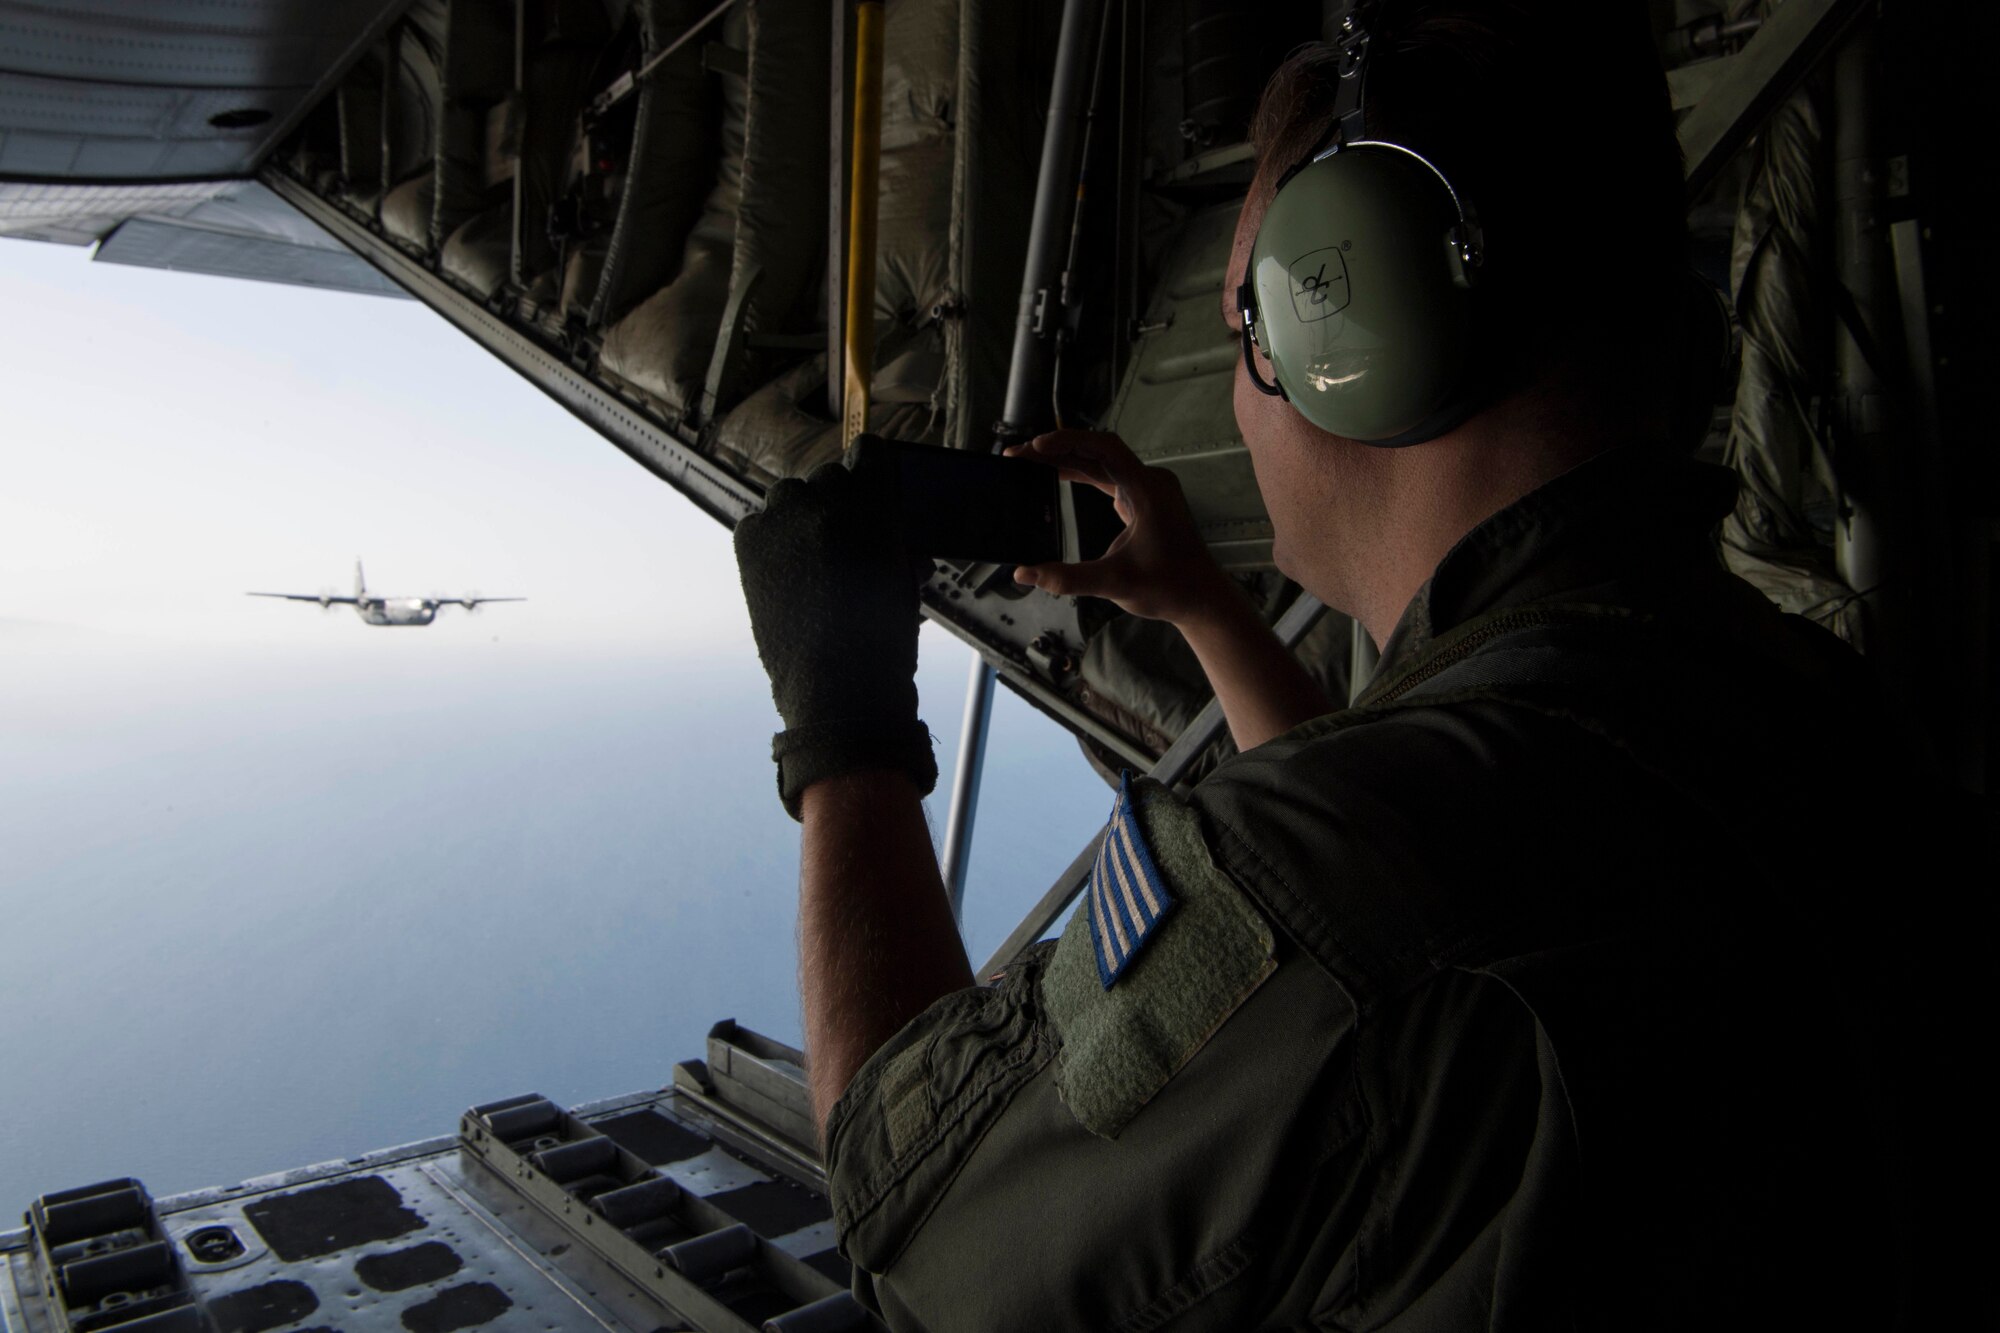 A Hellenic air force loadmaster takes photos of a U.S. Air Force C-130J Super Hercules during an exercise Stolen Cerberus V interfly mission in the skies near Elefsis Air Base, Greece, May 10, 2018. One U.S. Air Force C-130J and one Hellenic Air Force C-130H Hercules participated in the flight. (U.S. Air Force photo by Senior Airman Devin M. Rumbaugh)